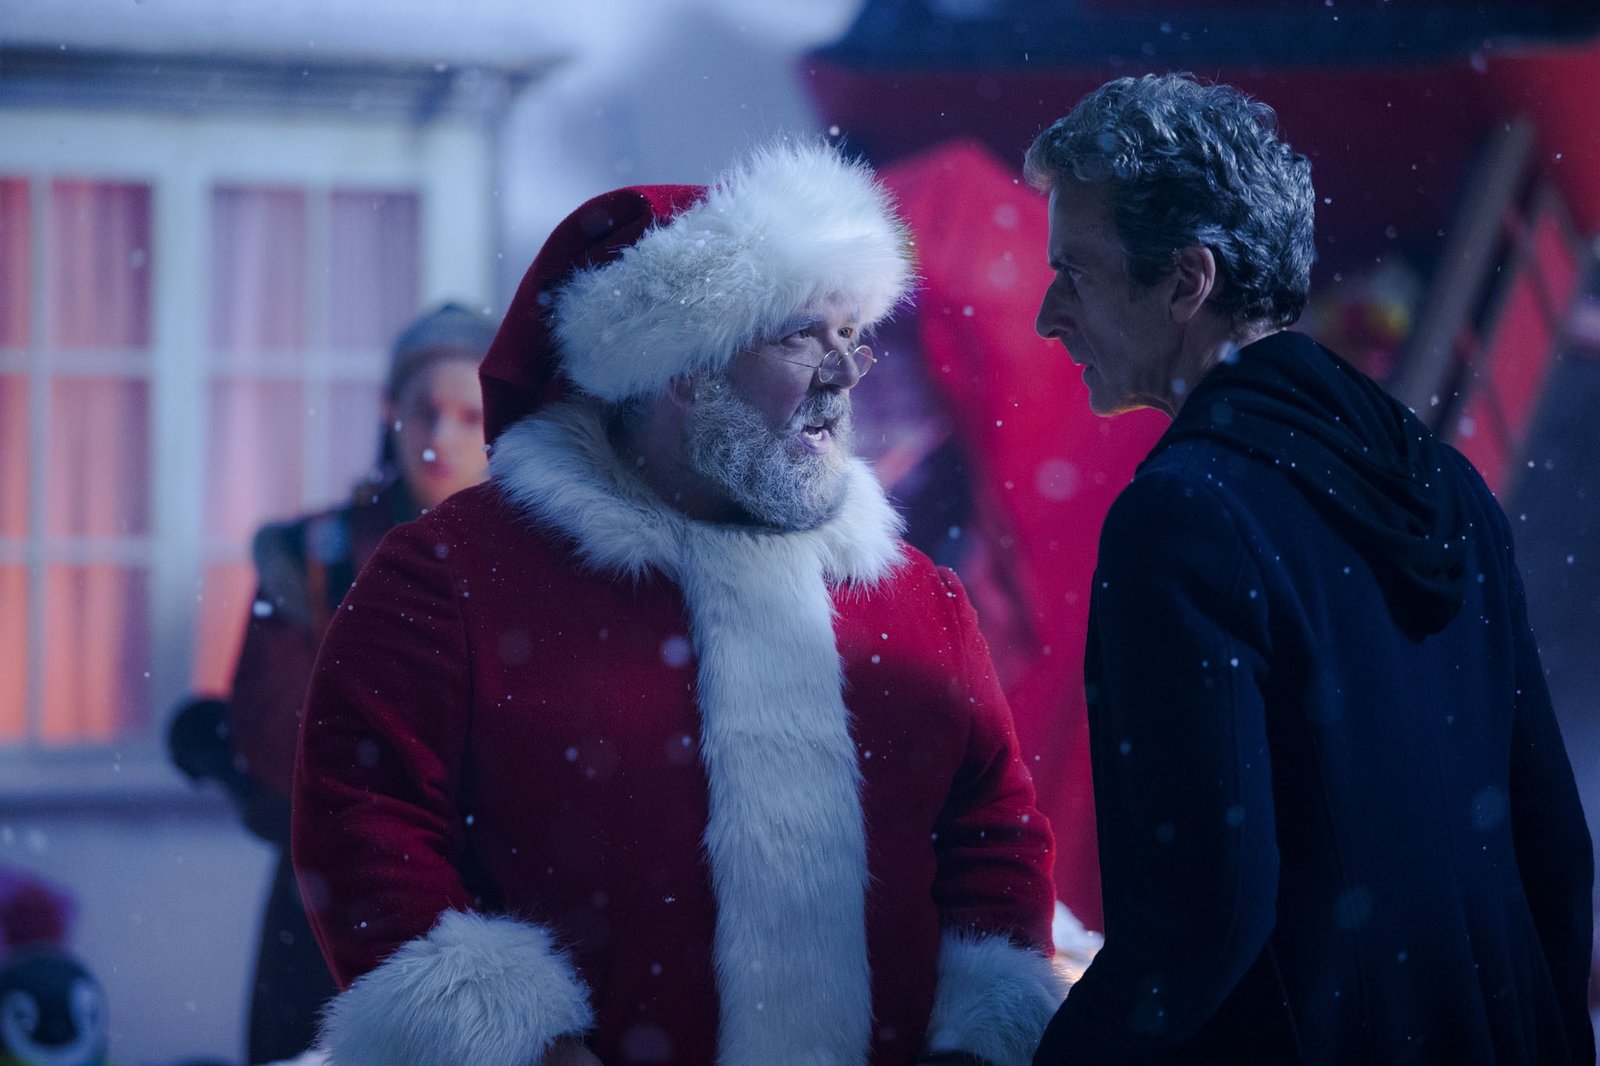 Yes, Virginia, There IS A Santa Claus: Does Father Christmas Exist in Doctor Who?